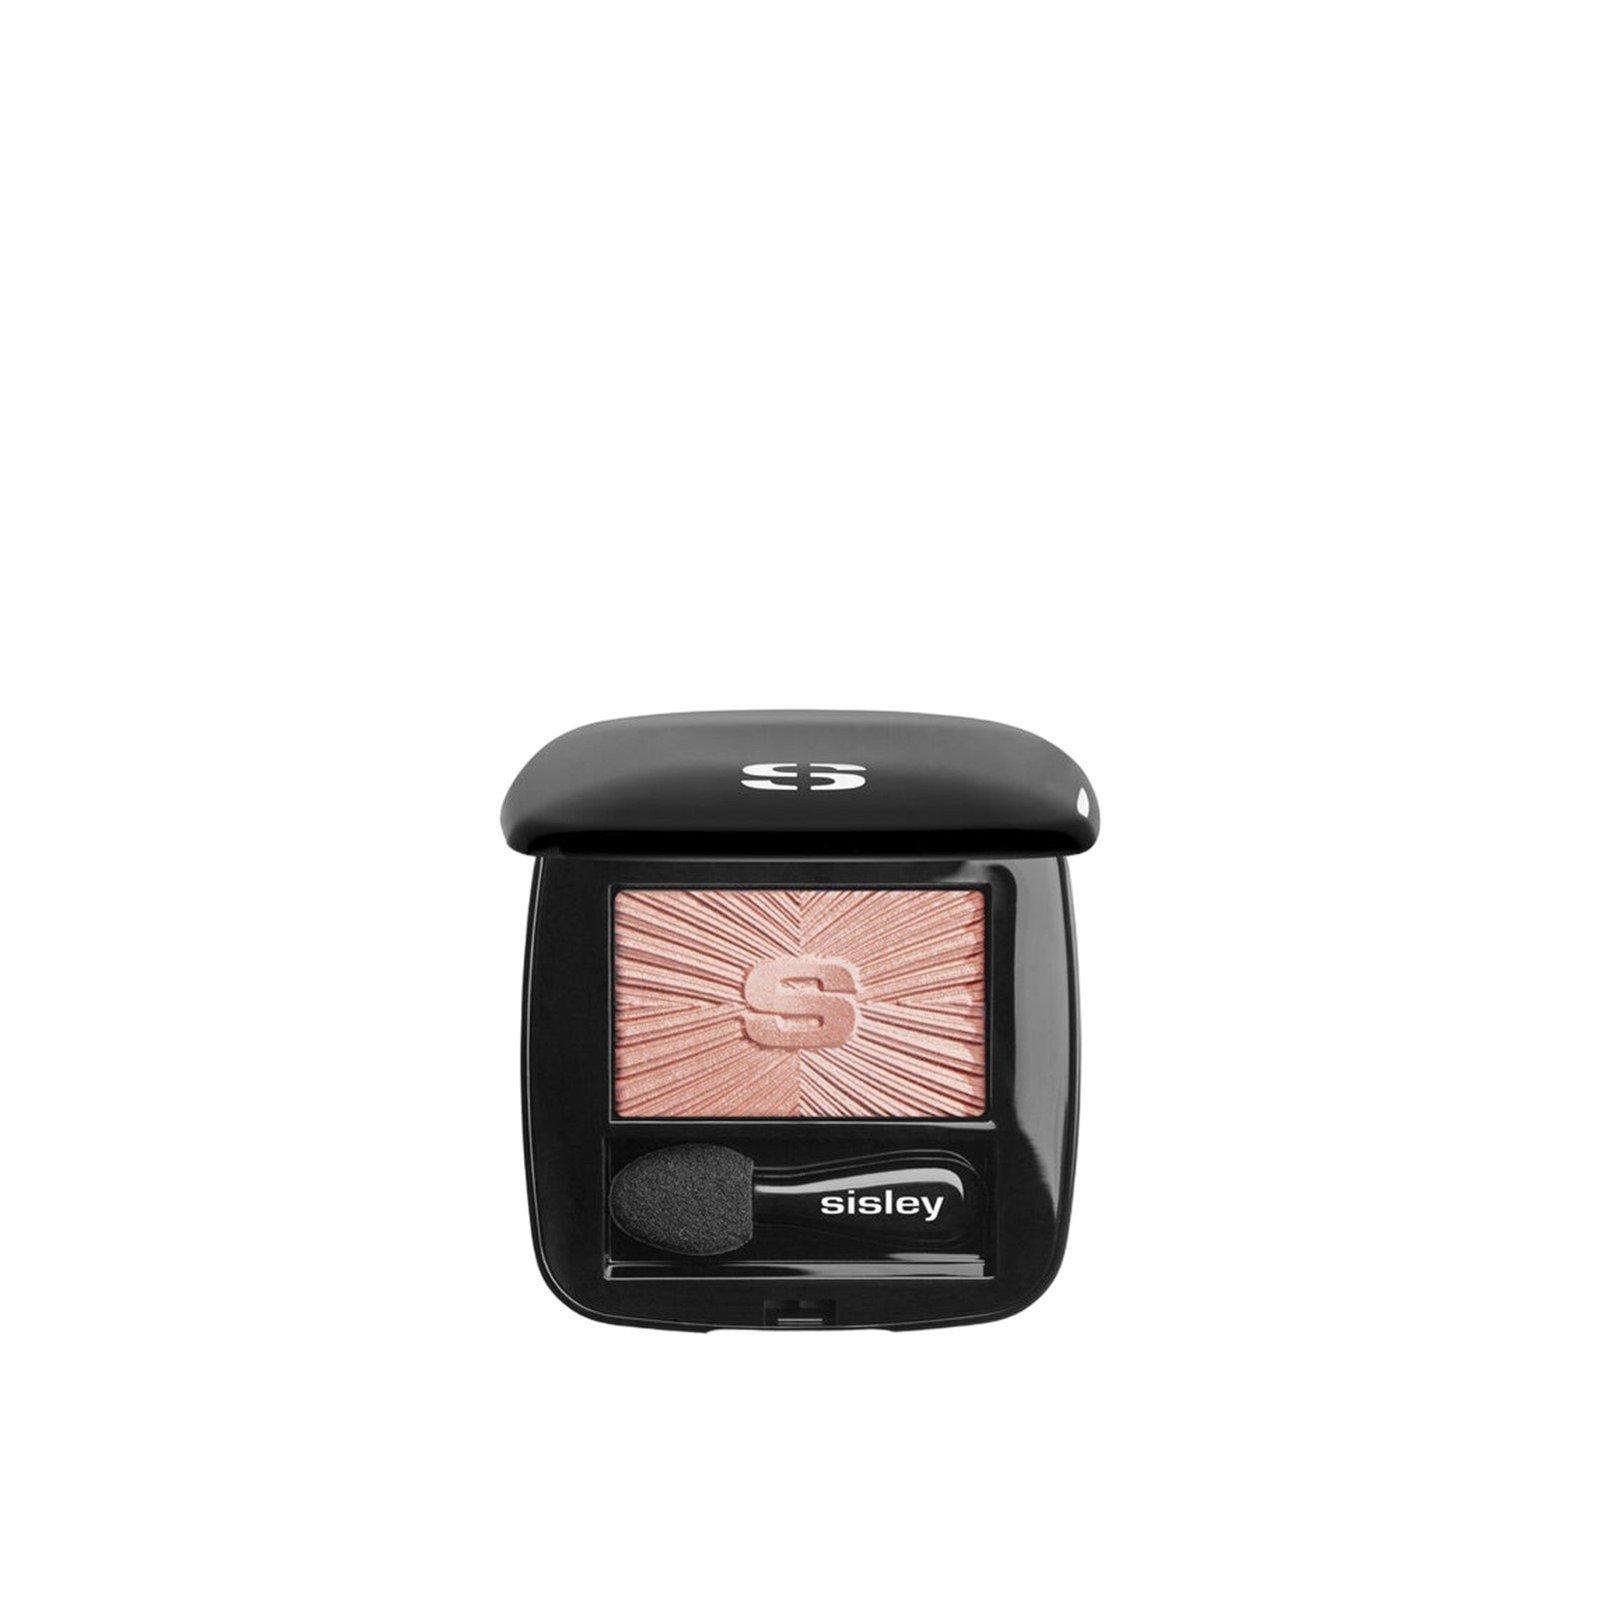 Sisley Paris Les Phyto-Ombres Long Lasting Radiant Eyeshadow 32 Silky Coral 1.5g (0.05 oz)